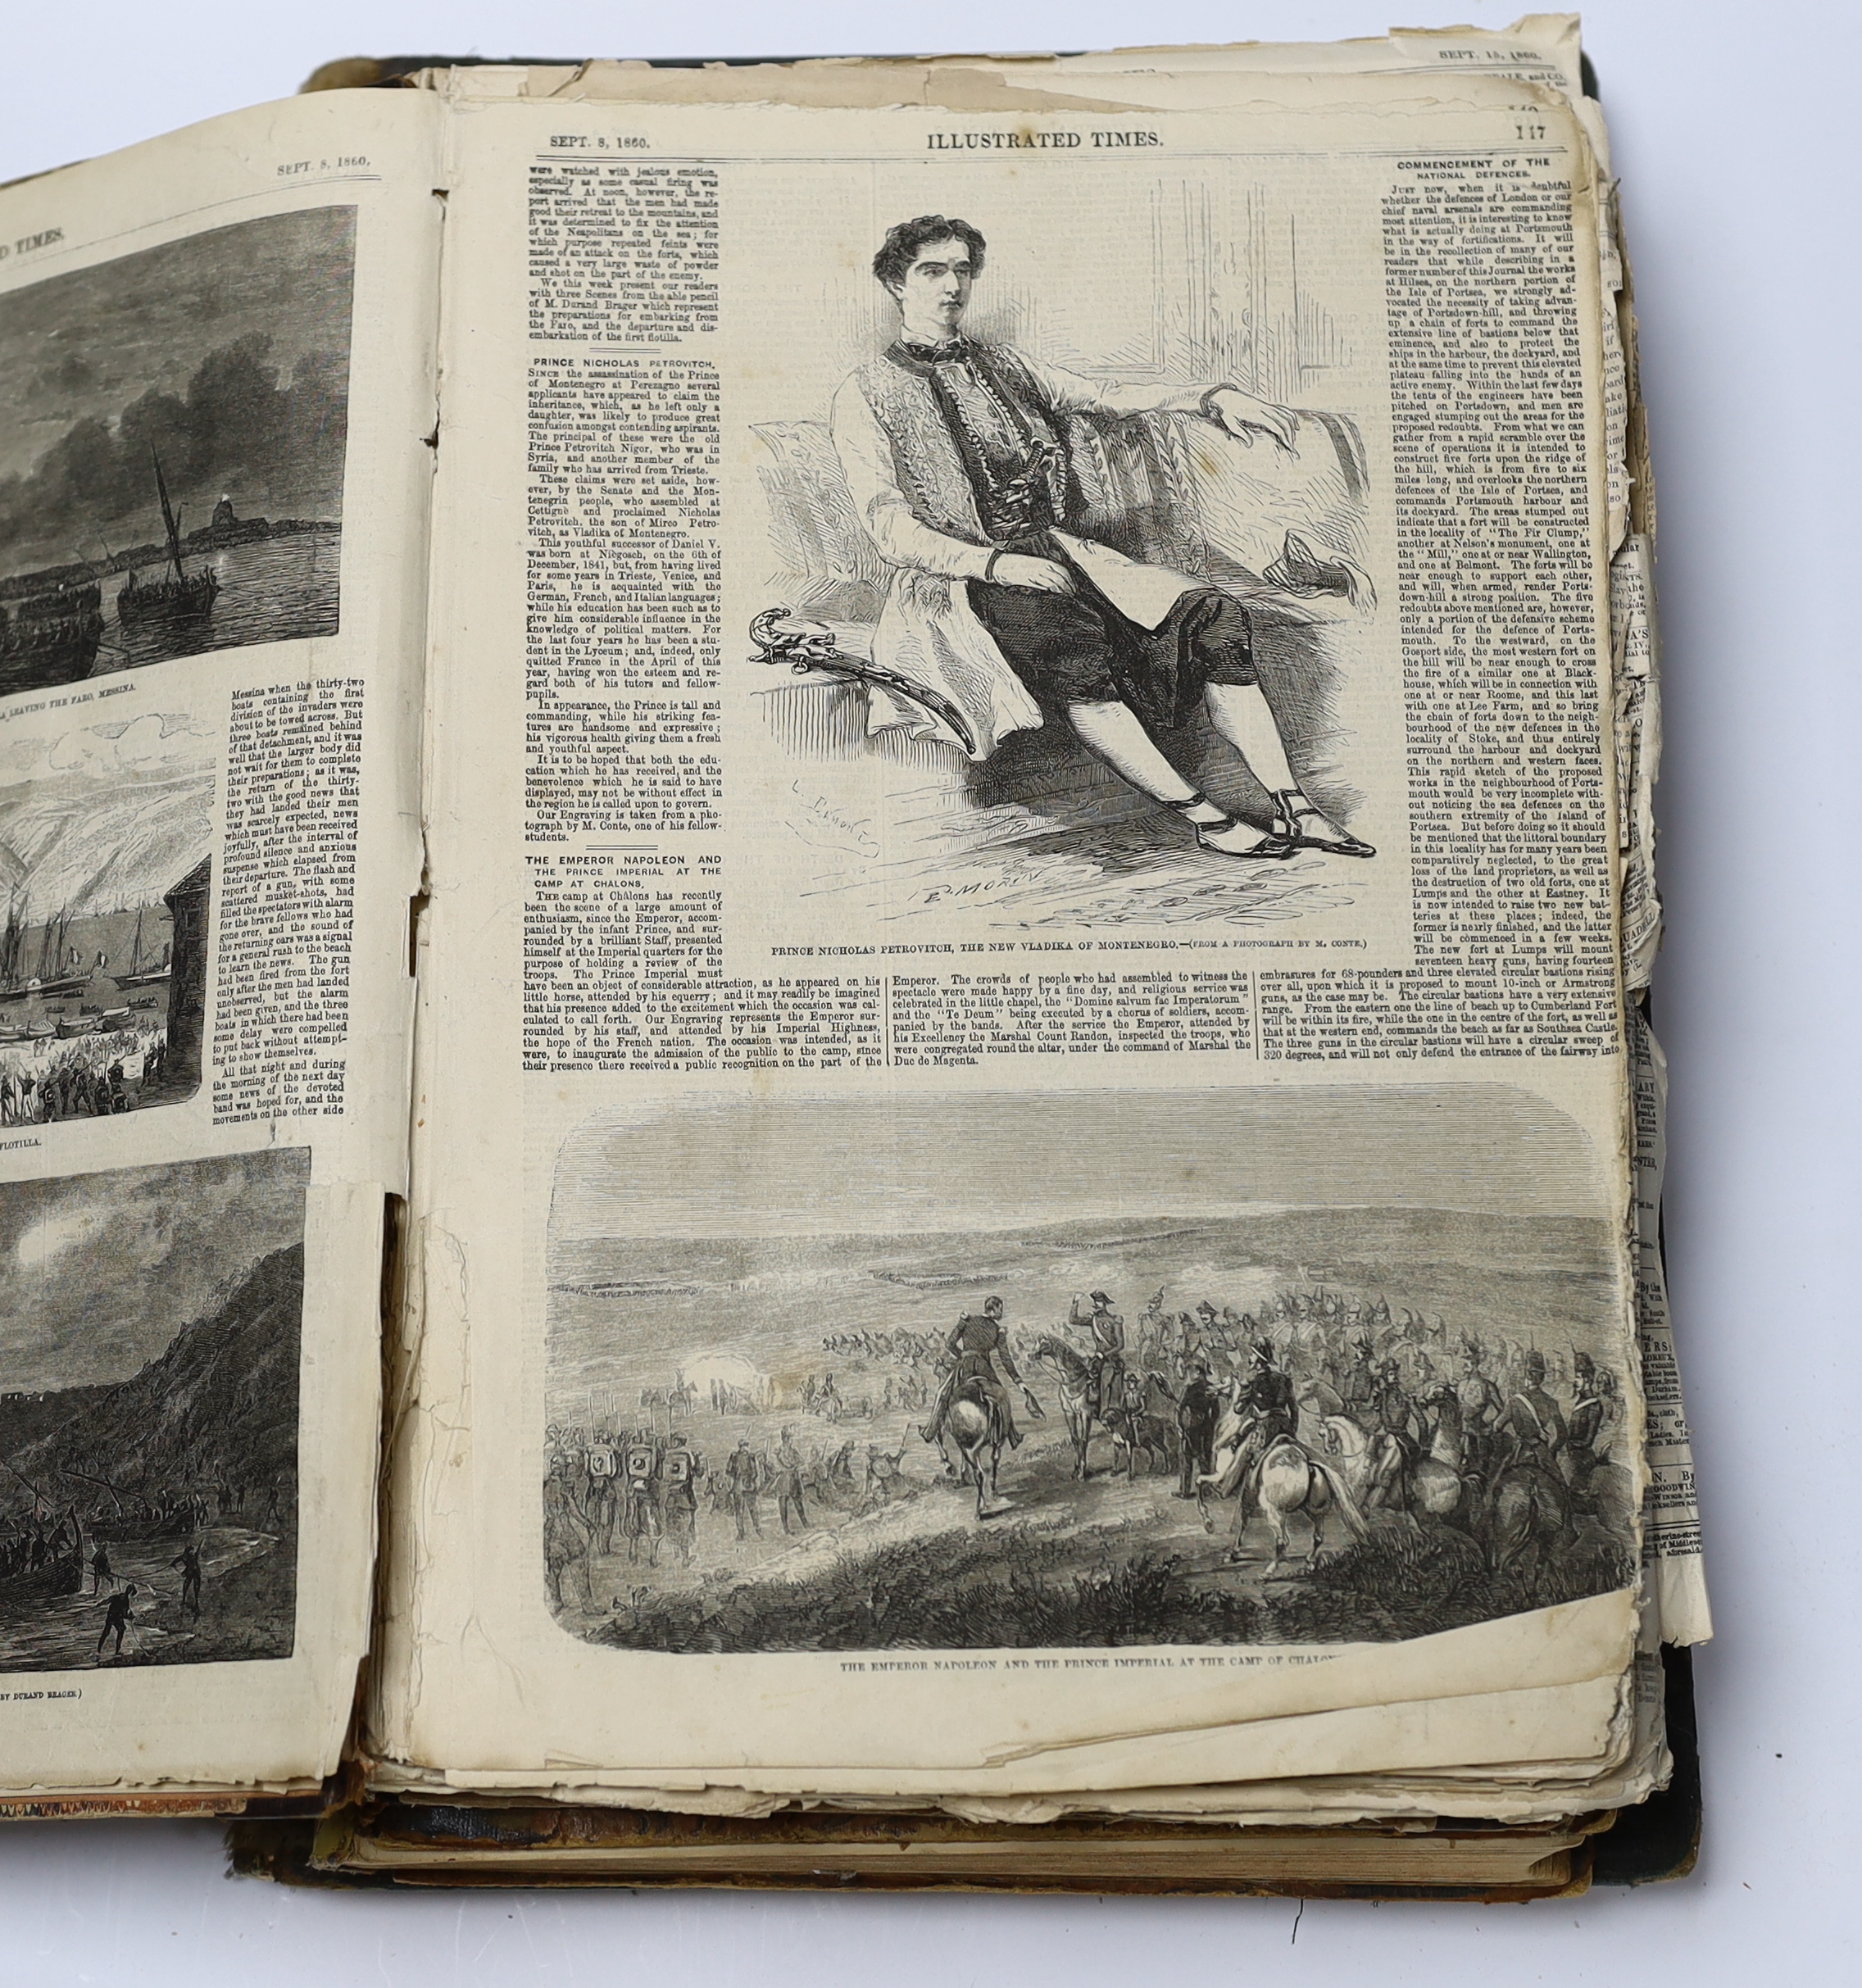 Bound volumes: Illustrated Times 1860, Licensed Victuallers Gazette 1888, The Royal Gallery of Art Vol 3